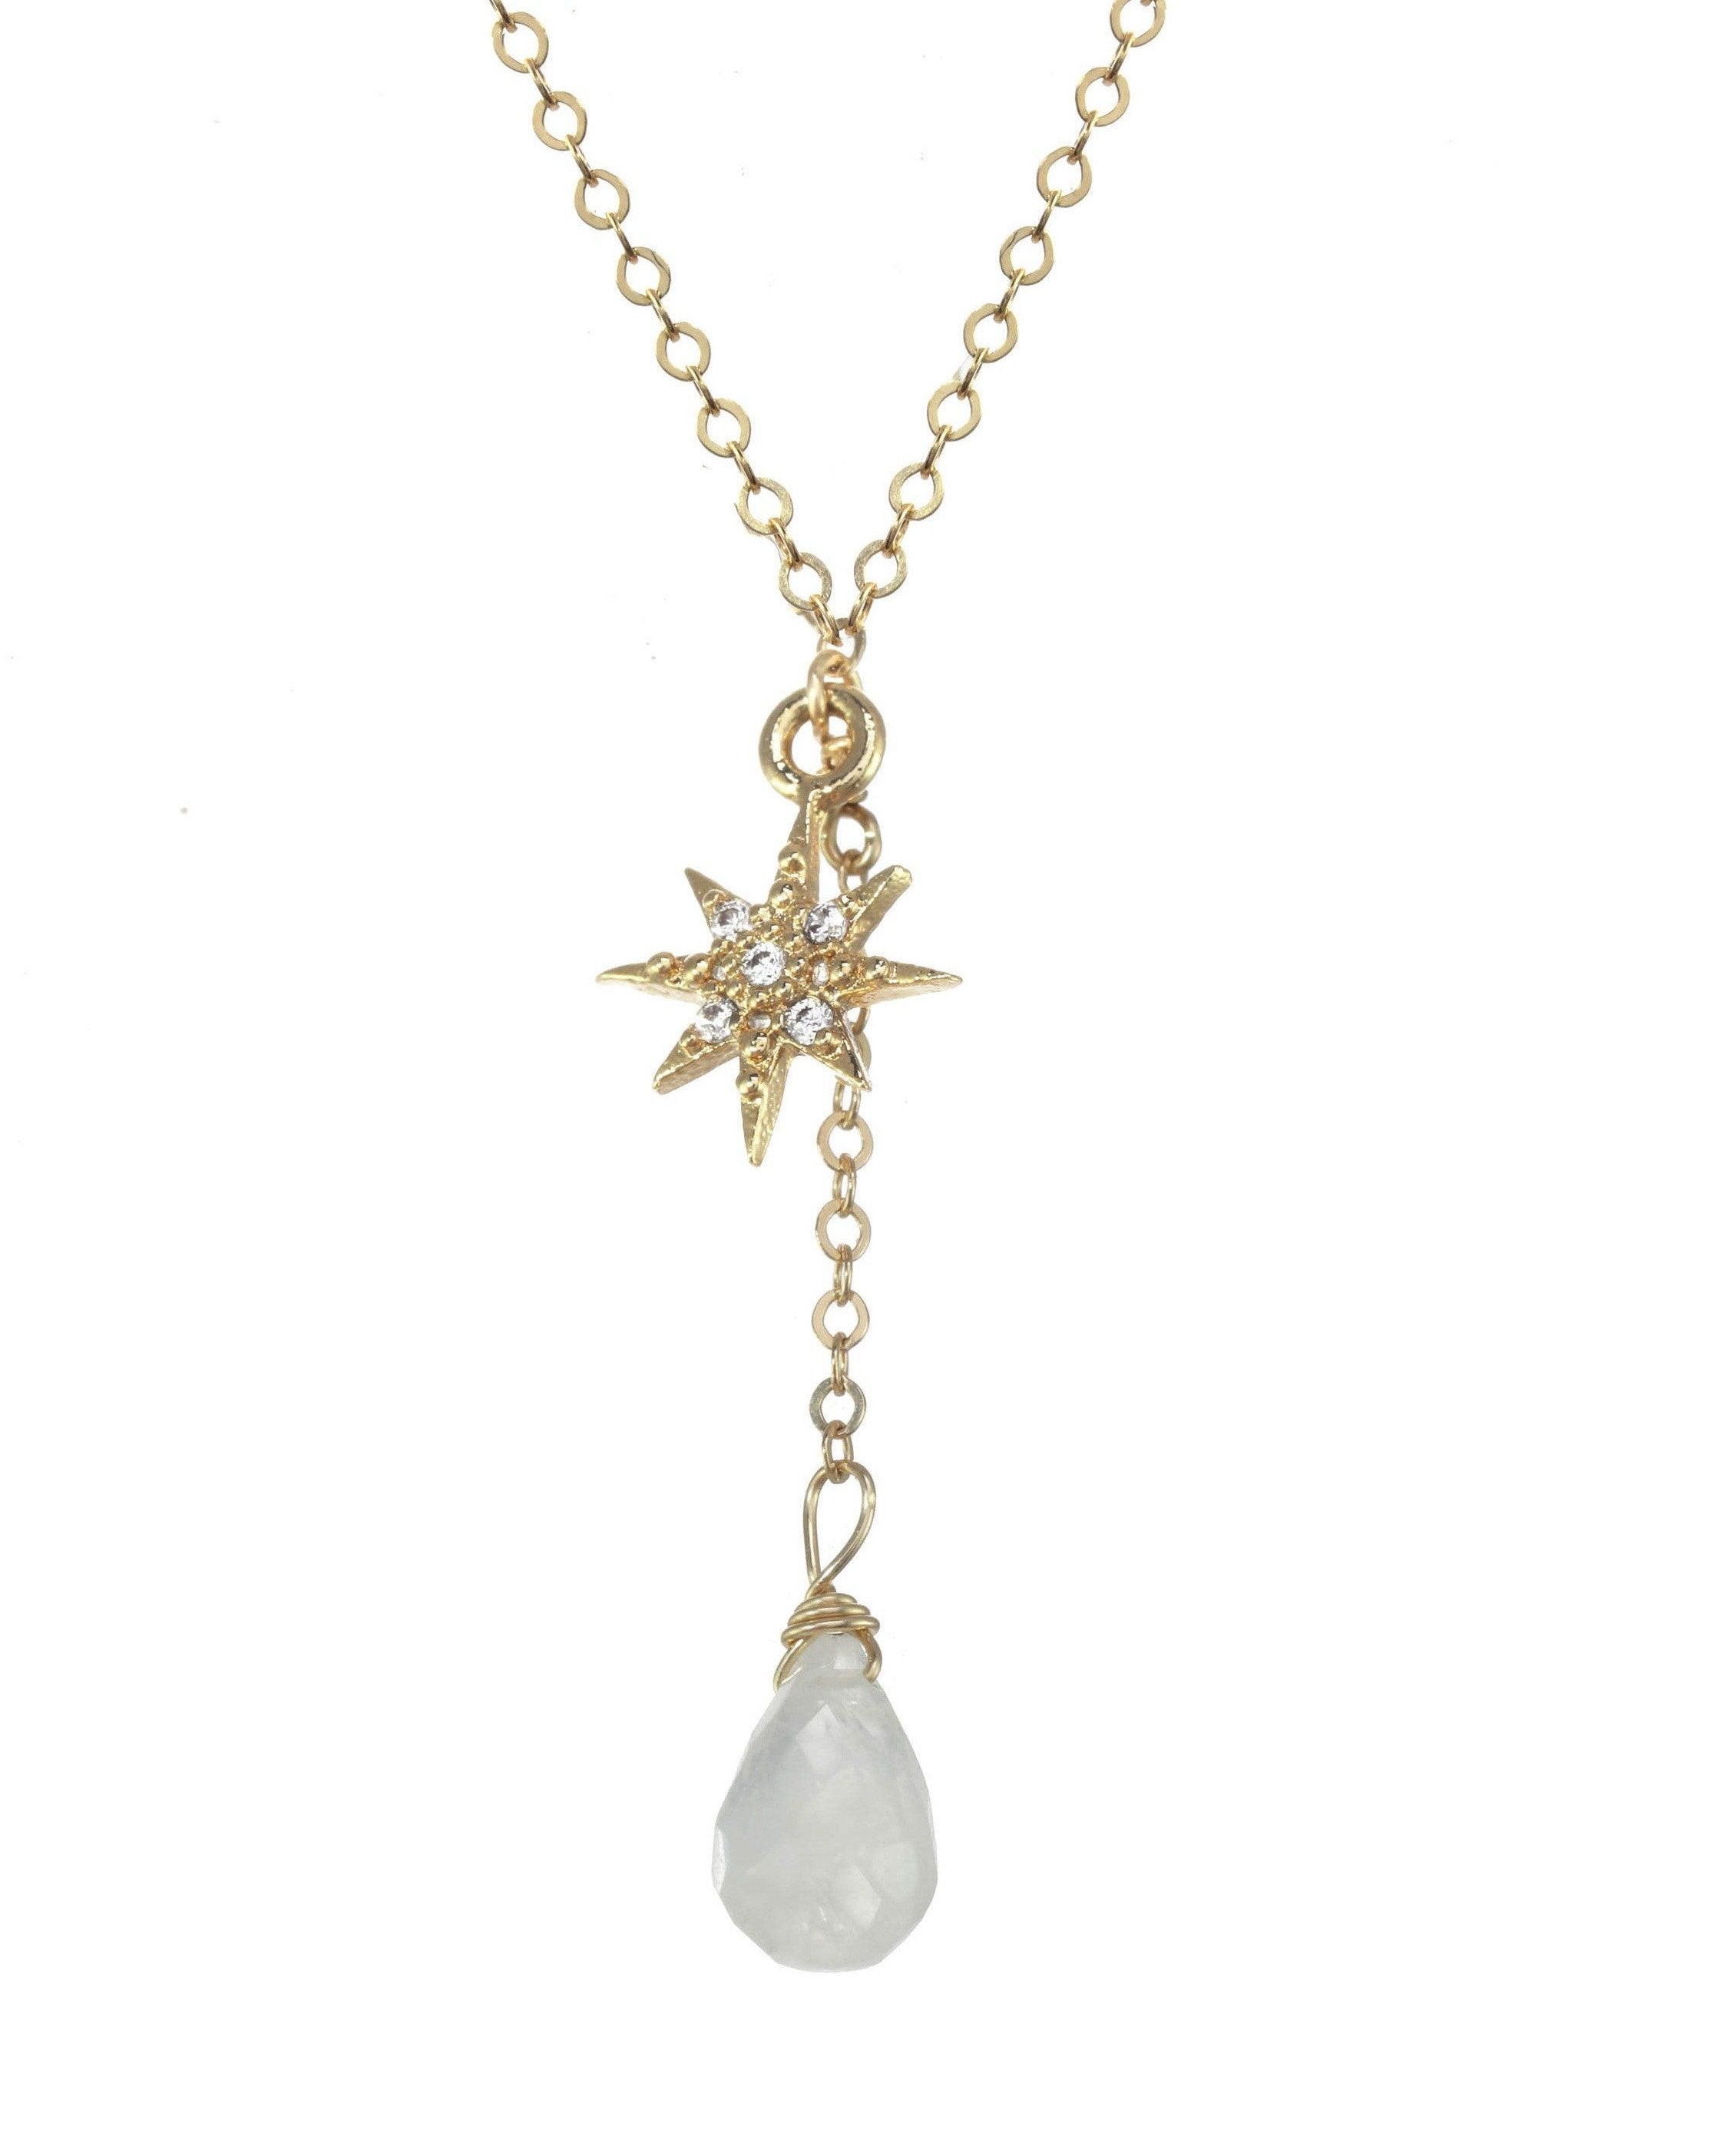 Corvus Necklace by KOZAKH. A 16 to 18 inch adjustable length, lariat style necklace in 14K Gold Filled, featuring a faceted Moonstone droplet and a Cubic Zirconia 8 point star charm.